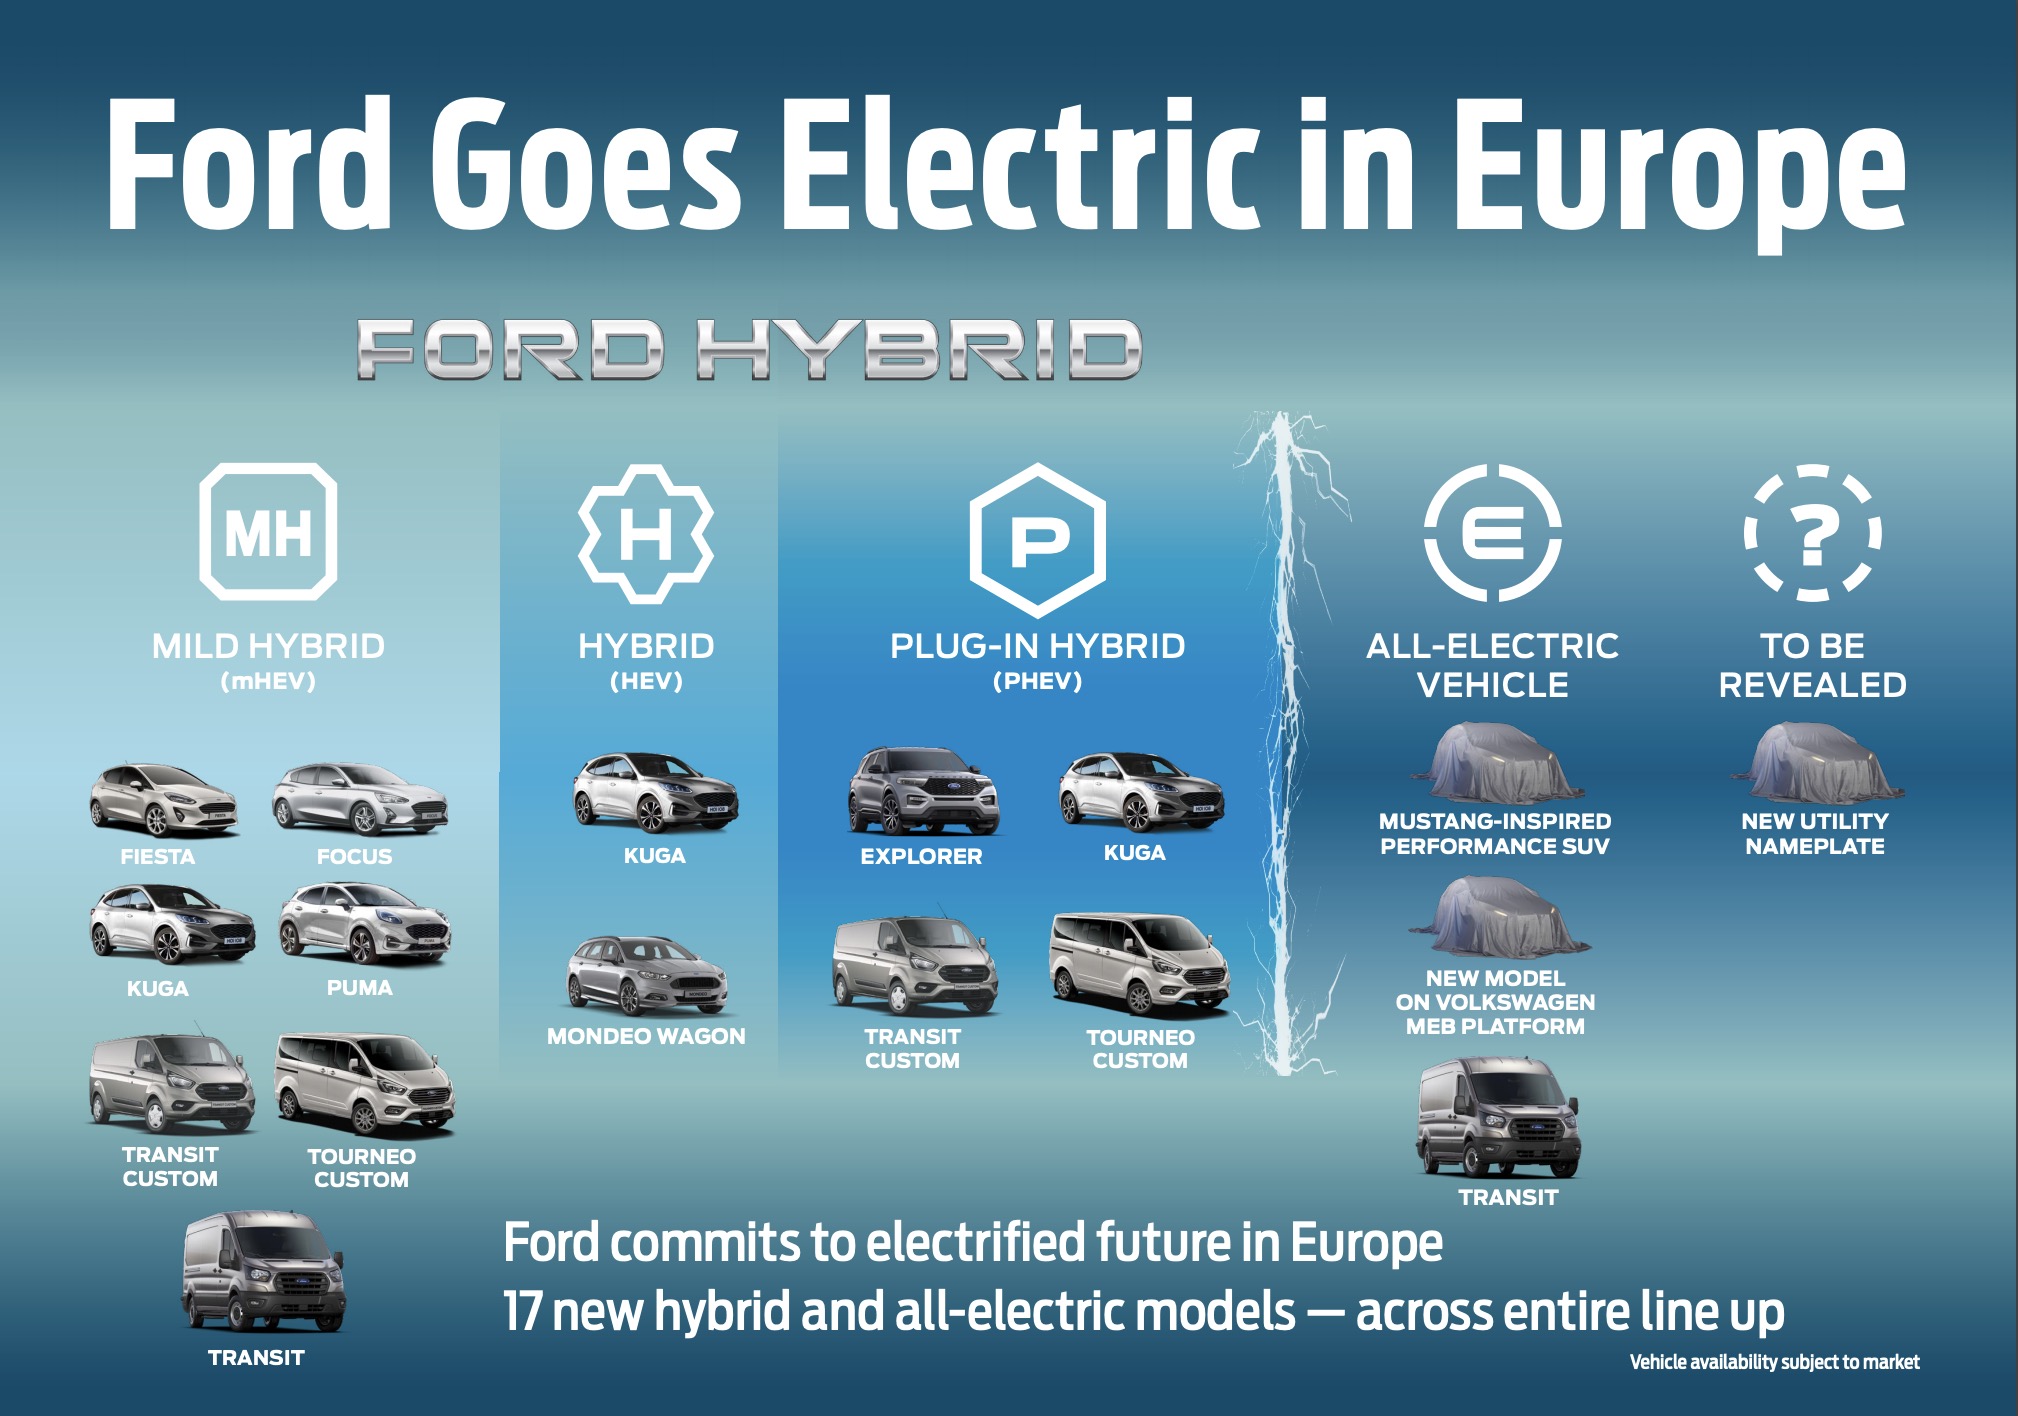 Ford Europe plans